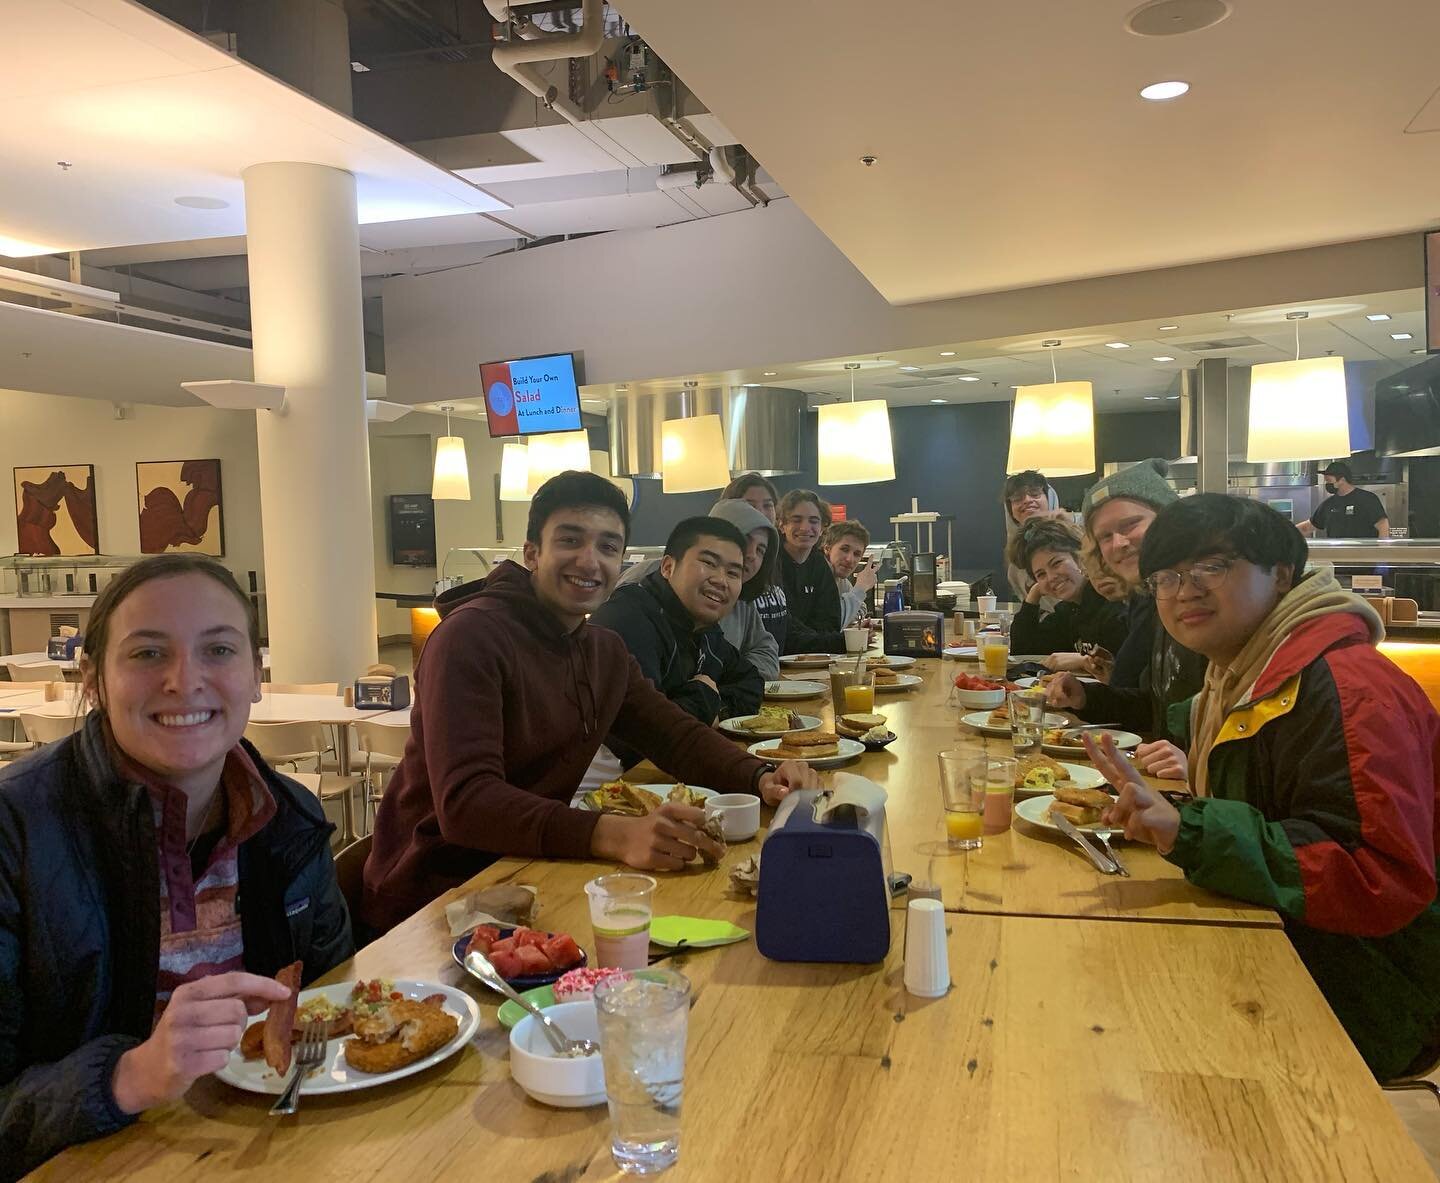 All smiles &amp; full bellies this Wednesday morning at team breakfast after a partner piece today! Nothing quite works up an appetite like rowing practice